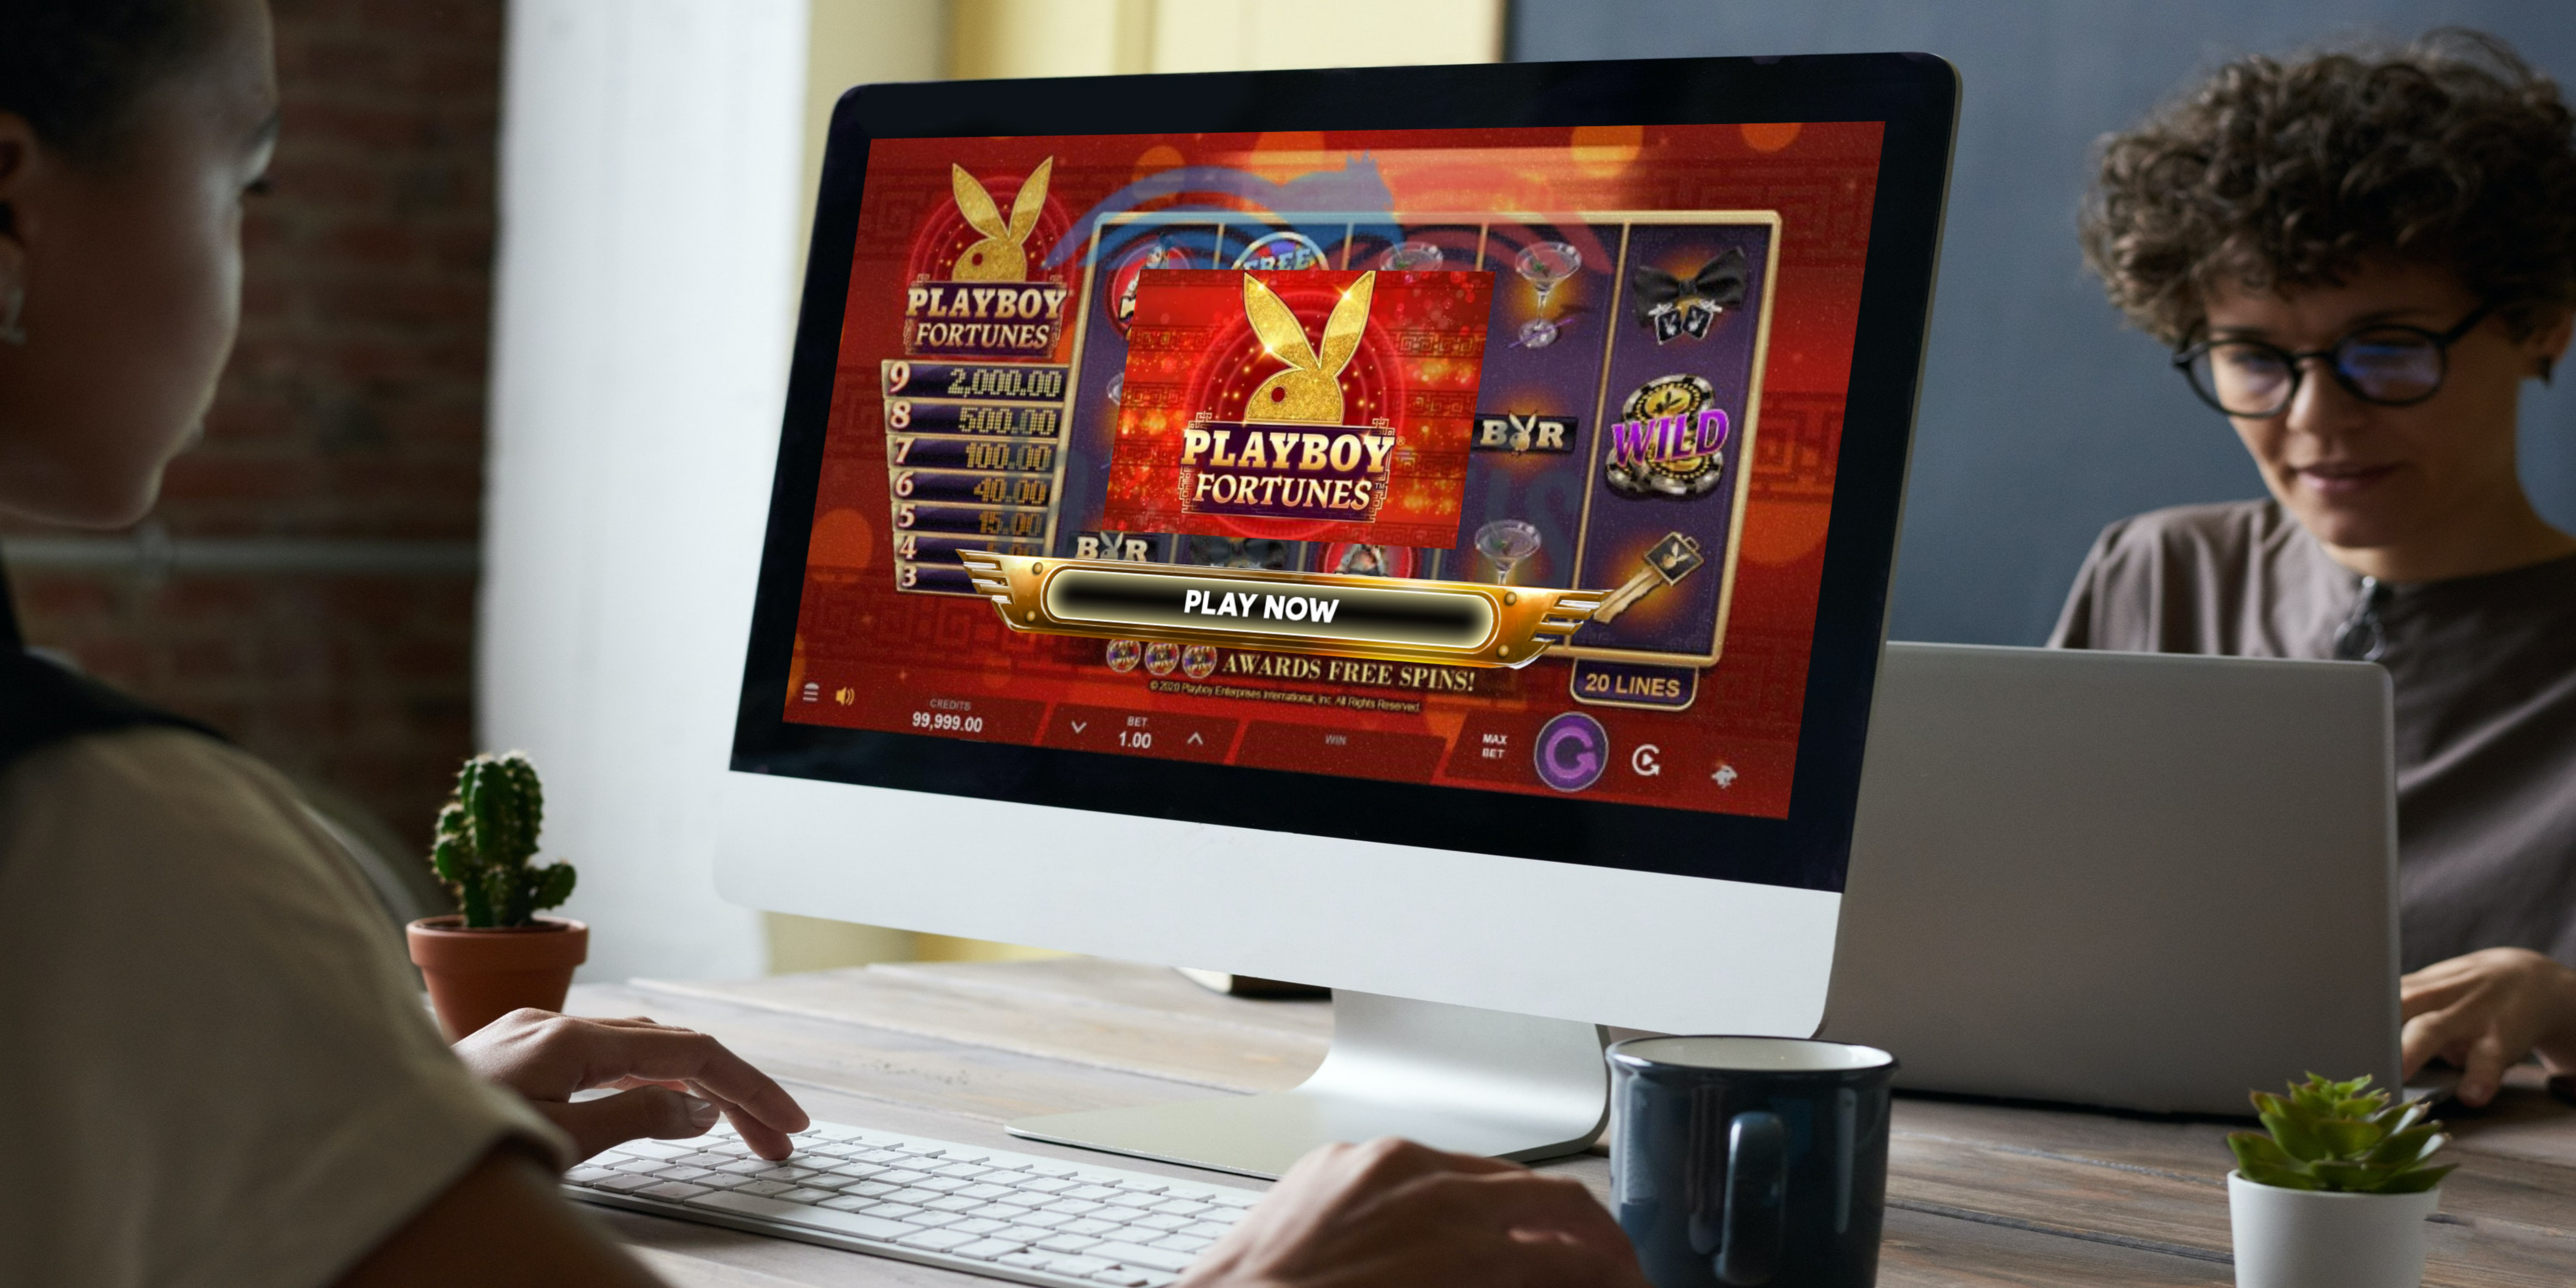 Playboy Fortunes Slot Online Microgaming Review